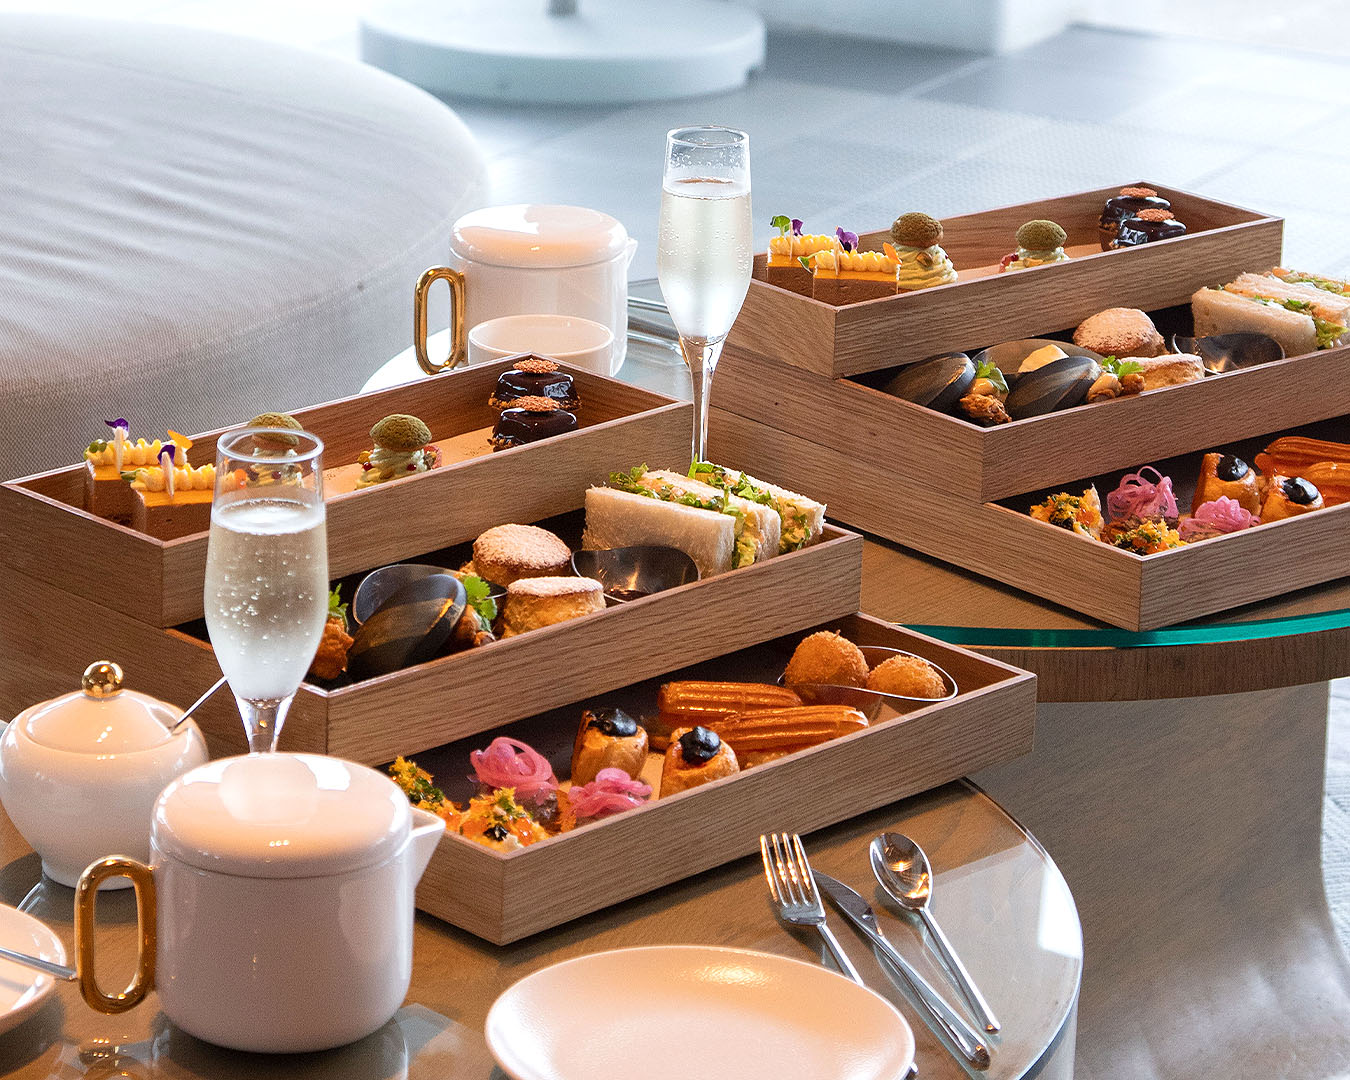 A sumptuous feast at Bellini Bar at the Hilton, one of the best high teas in Auckland.